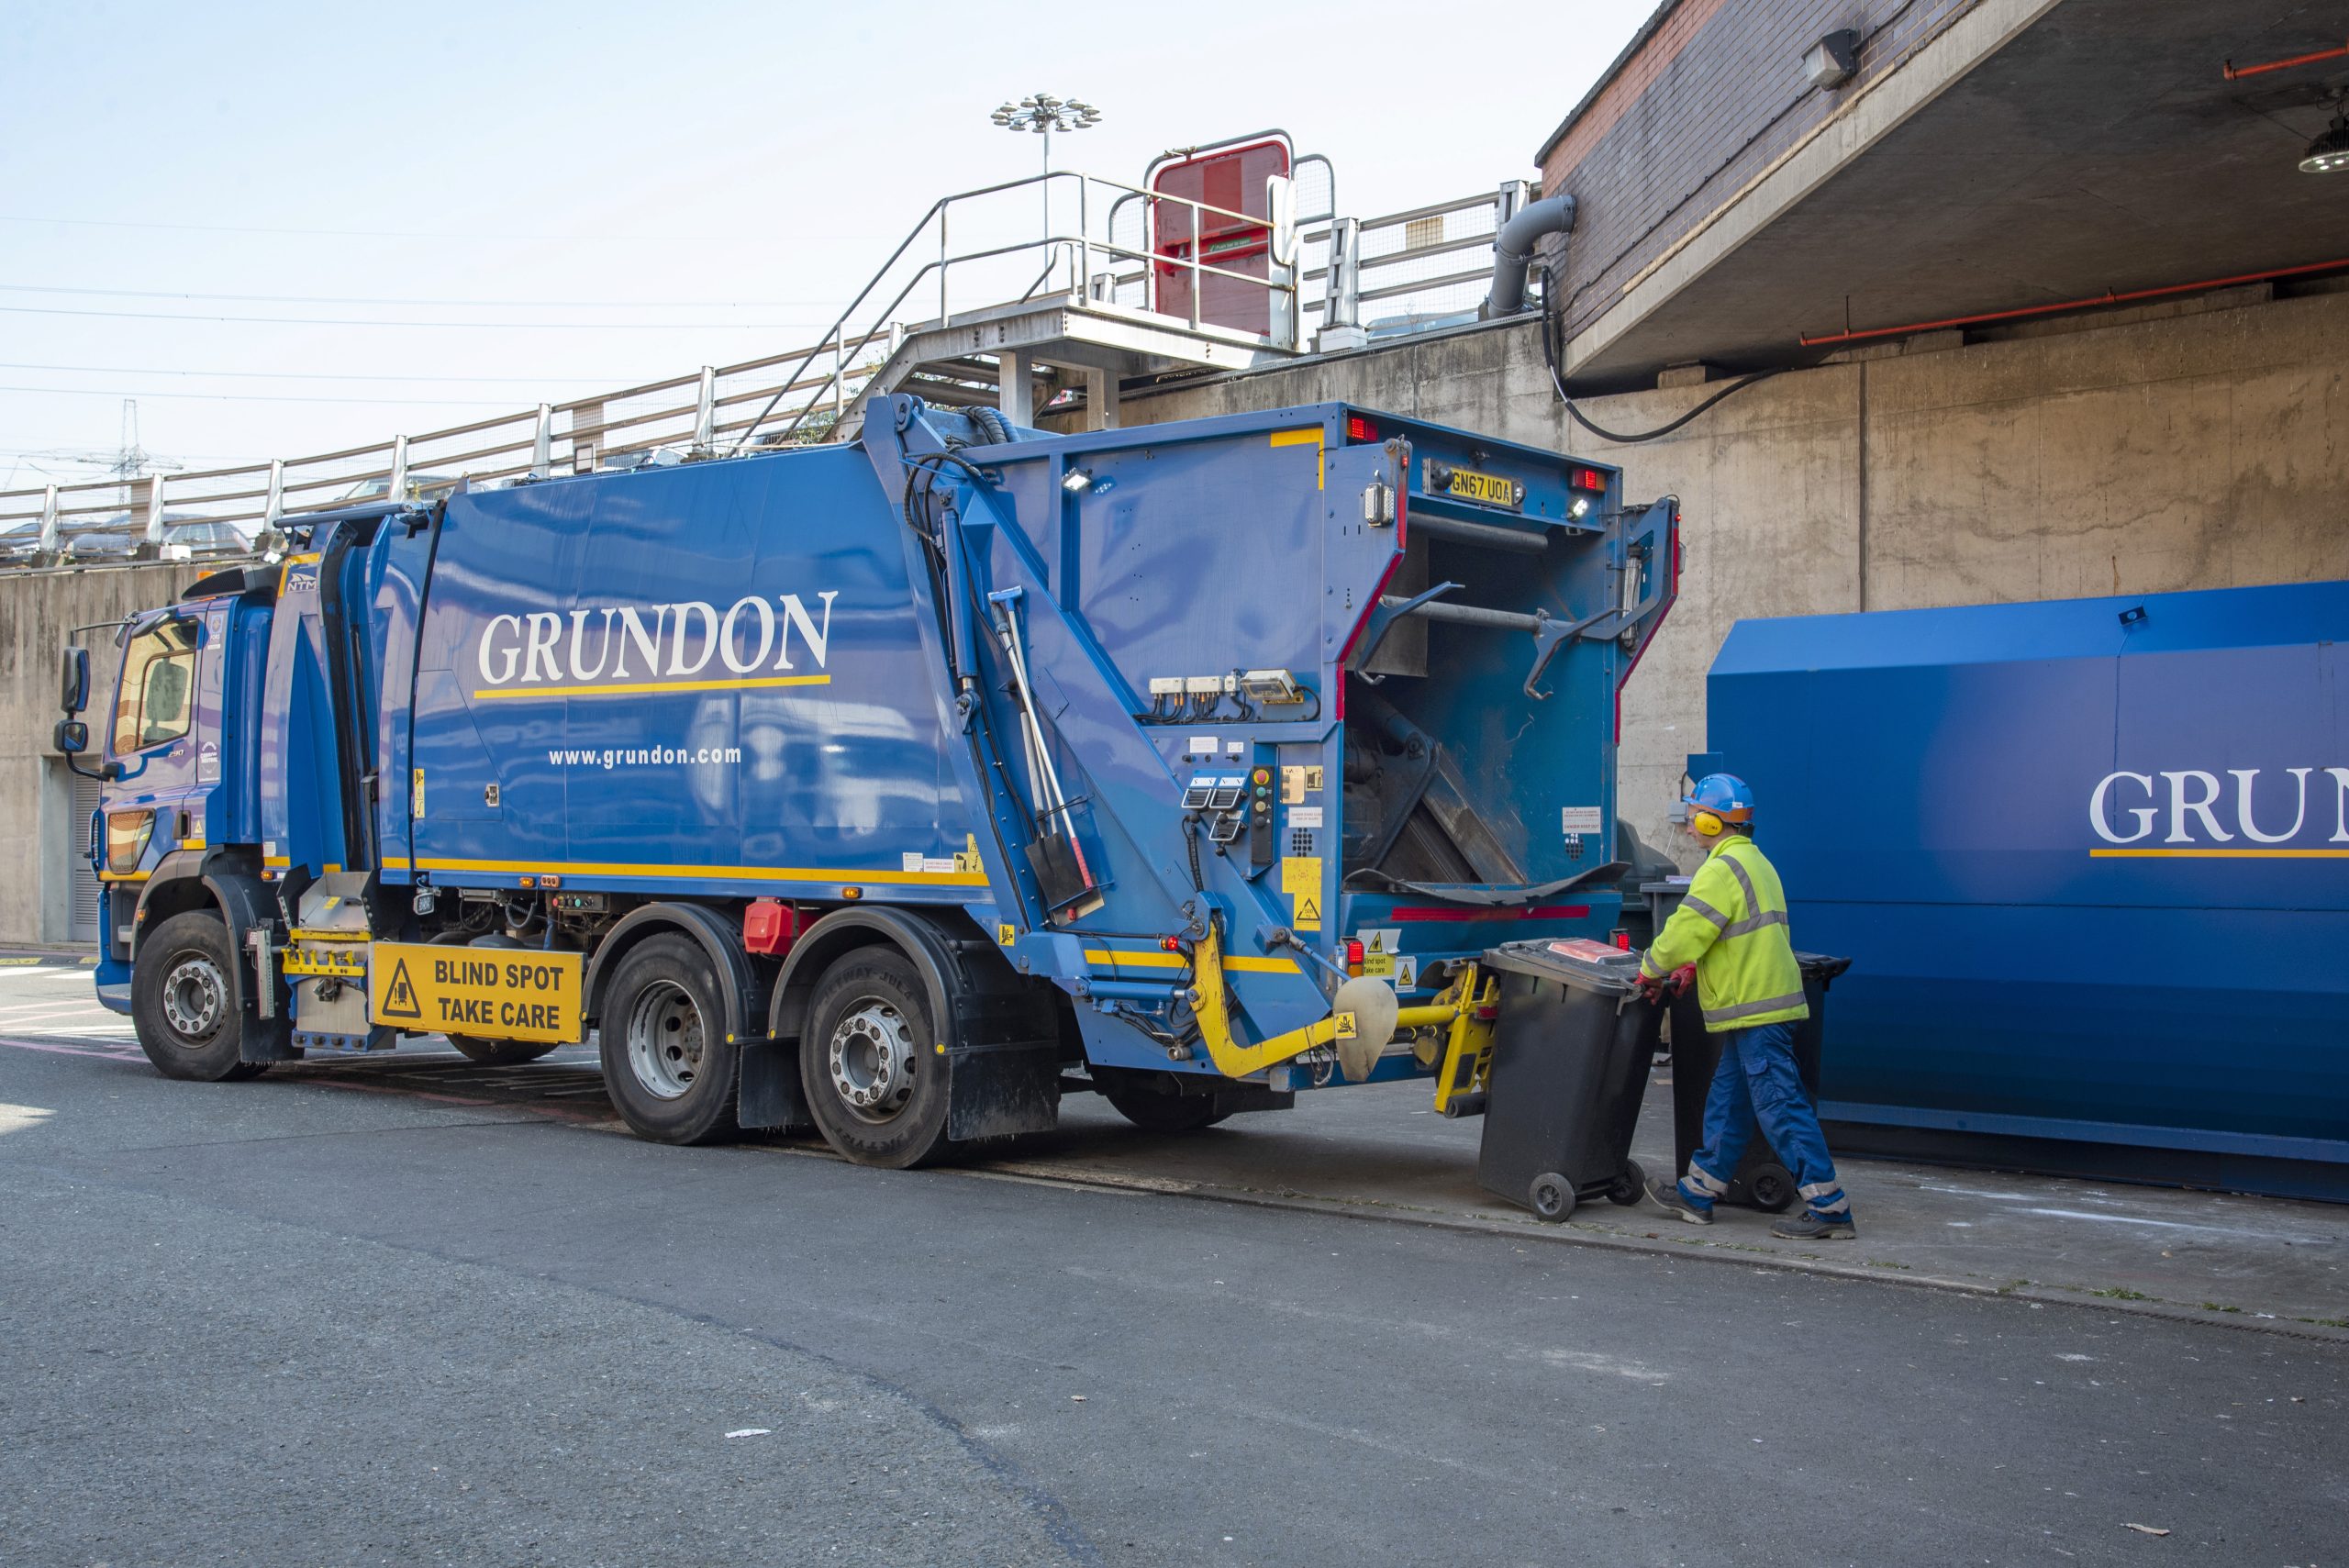 By facilitating more on-site recycling, the number of waste vehicle collection journeys has now dropped significantly.